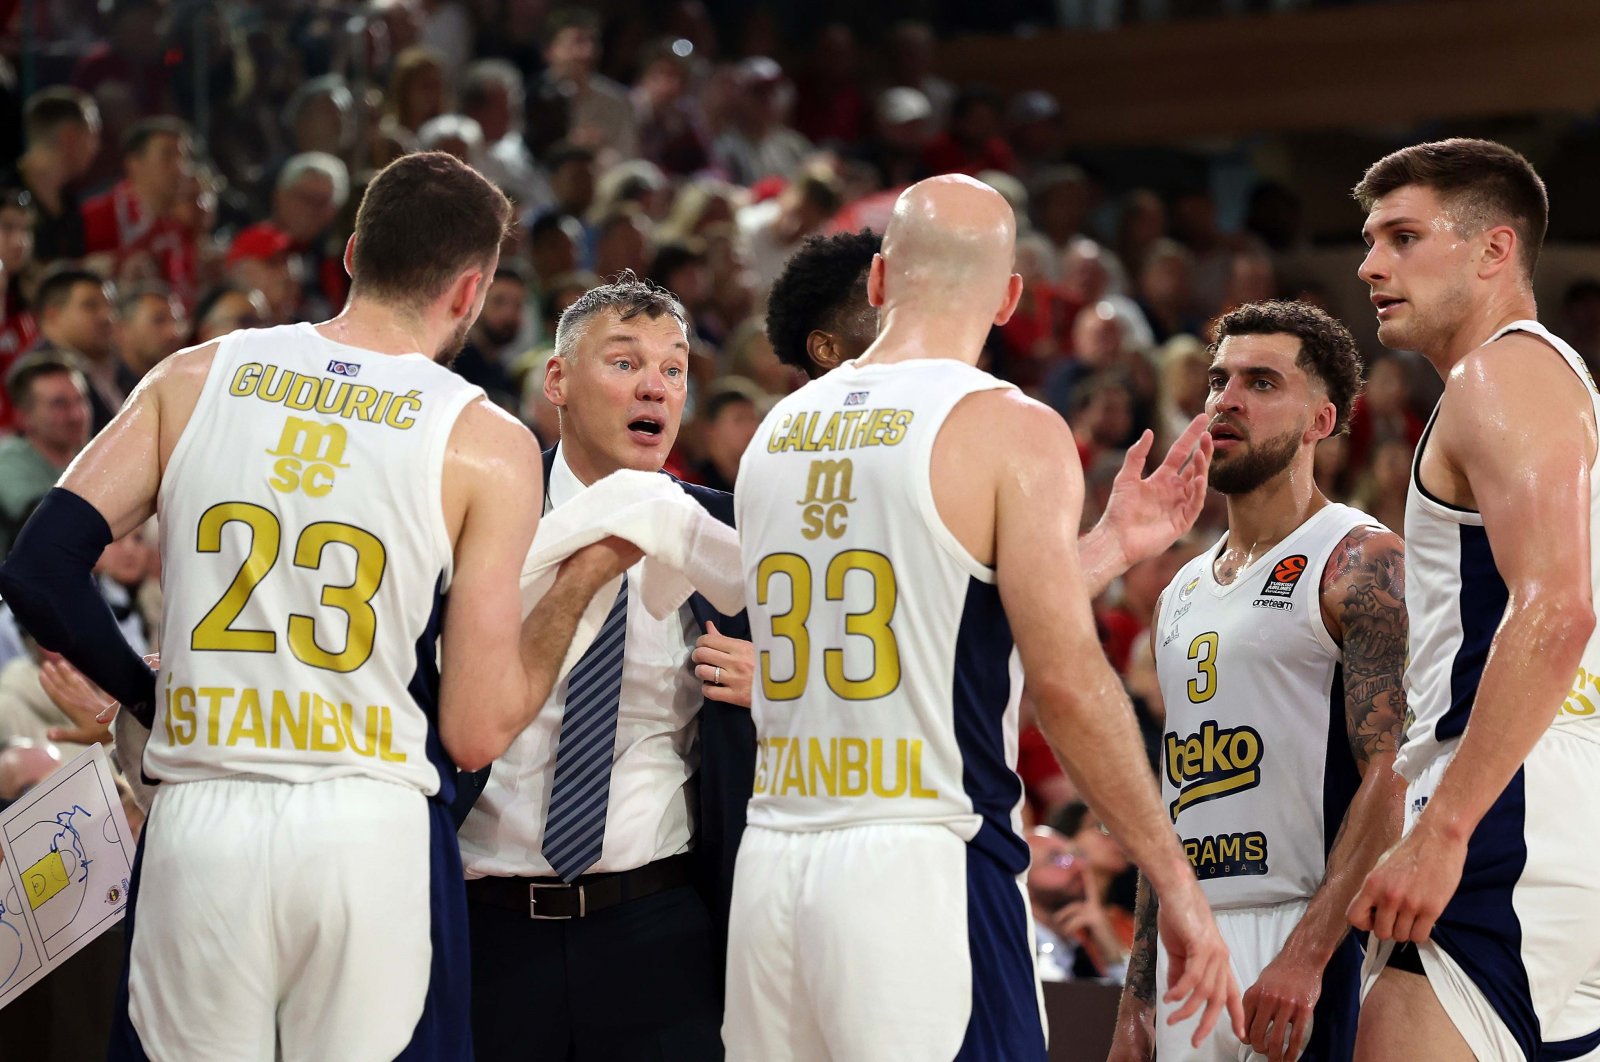 Fenerbahçe head coach Sarunas Jasikevicius (2nd L) gives instructions to his players during the EuroLeague match against Monaco at the Salle Omnisports Gaston, Monaco, Monaco, May 8, 2024. (AA Photo)